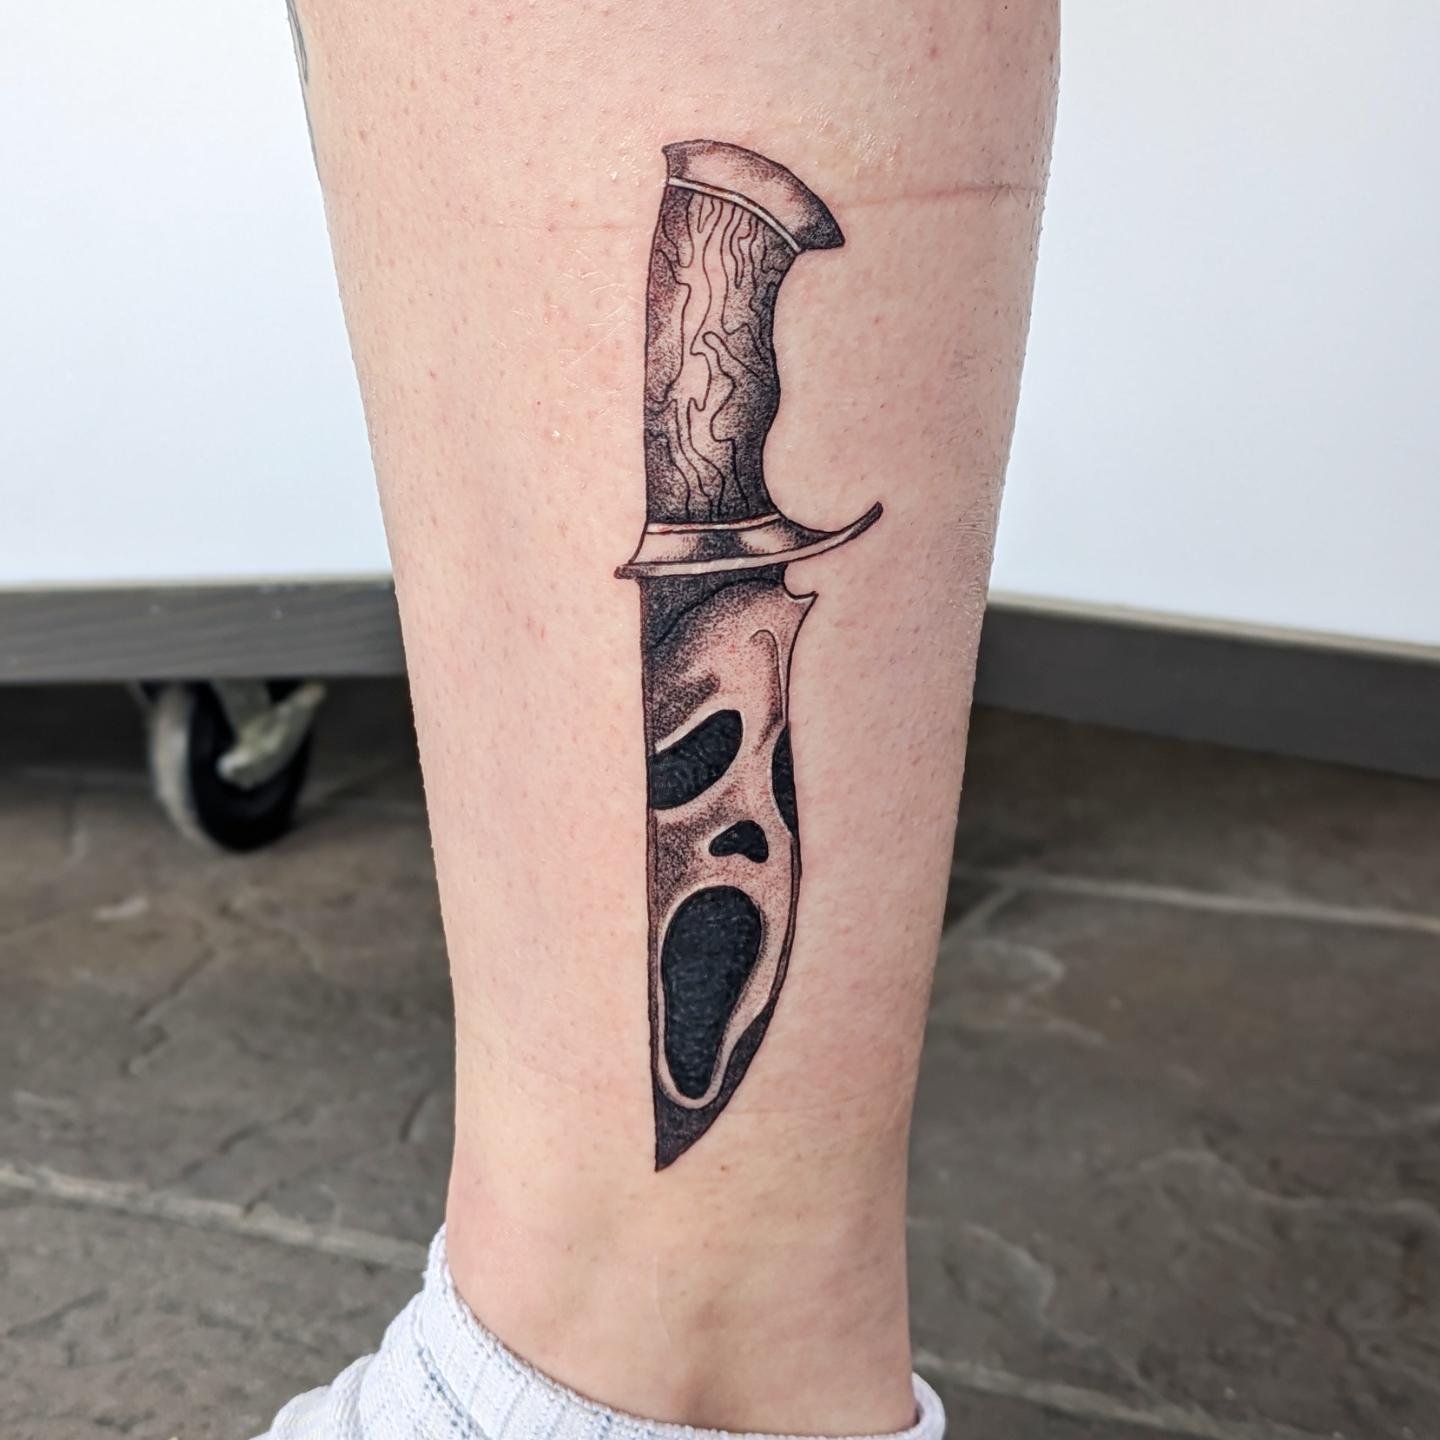 Amee's legs keep getting cooler and cooler 😎🤟thanks pal! 

&bull;&bull;&bull;&bull;&bull;&bull;&bull;&bull;&bull;&bull;&bull;&bull;&bull;&bull;&bull;&bull;&bull;&bull;&bull;&bull;&bull;&bull;&bull;&bull;

#ghostface #dagger #ghostfacetattoo #scream